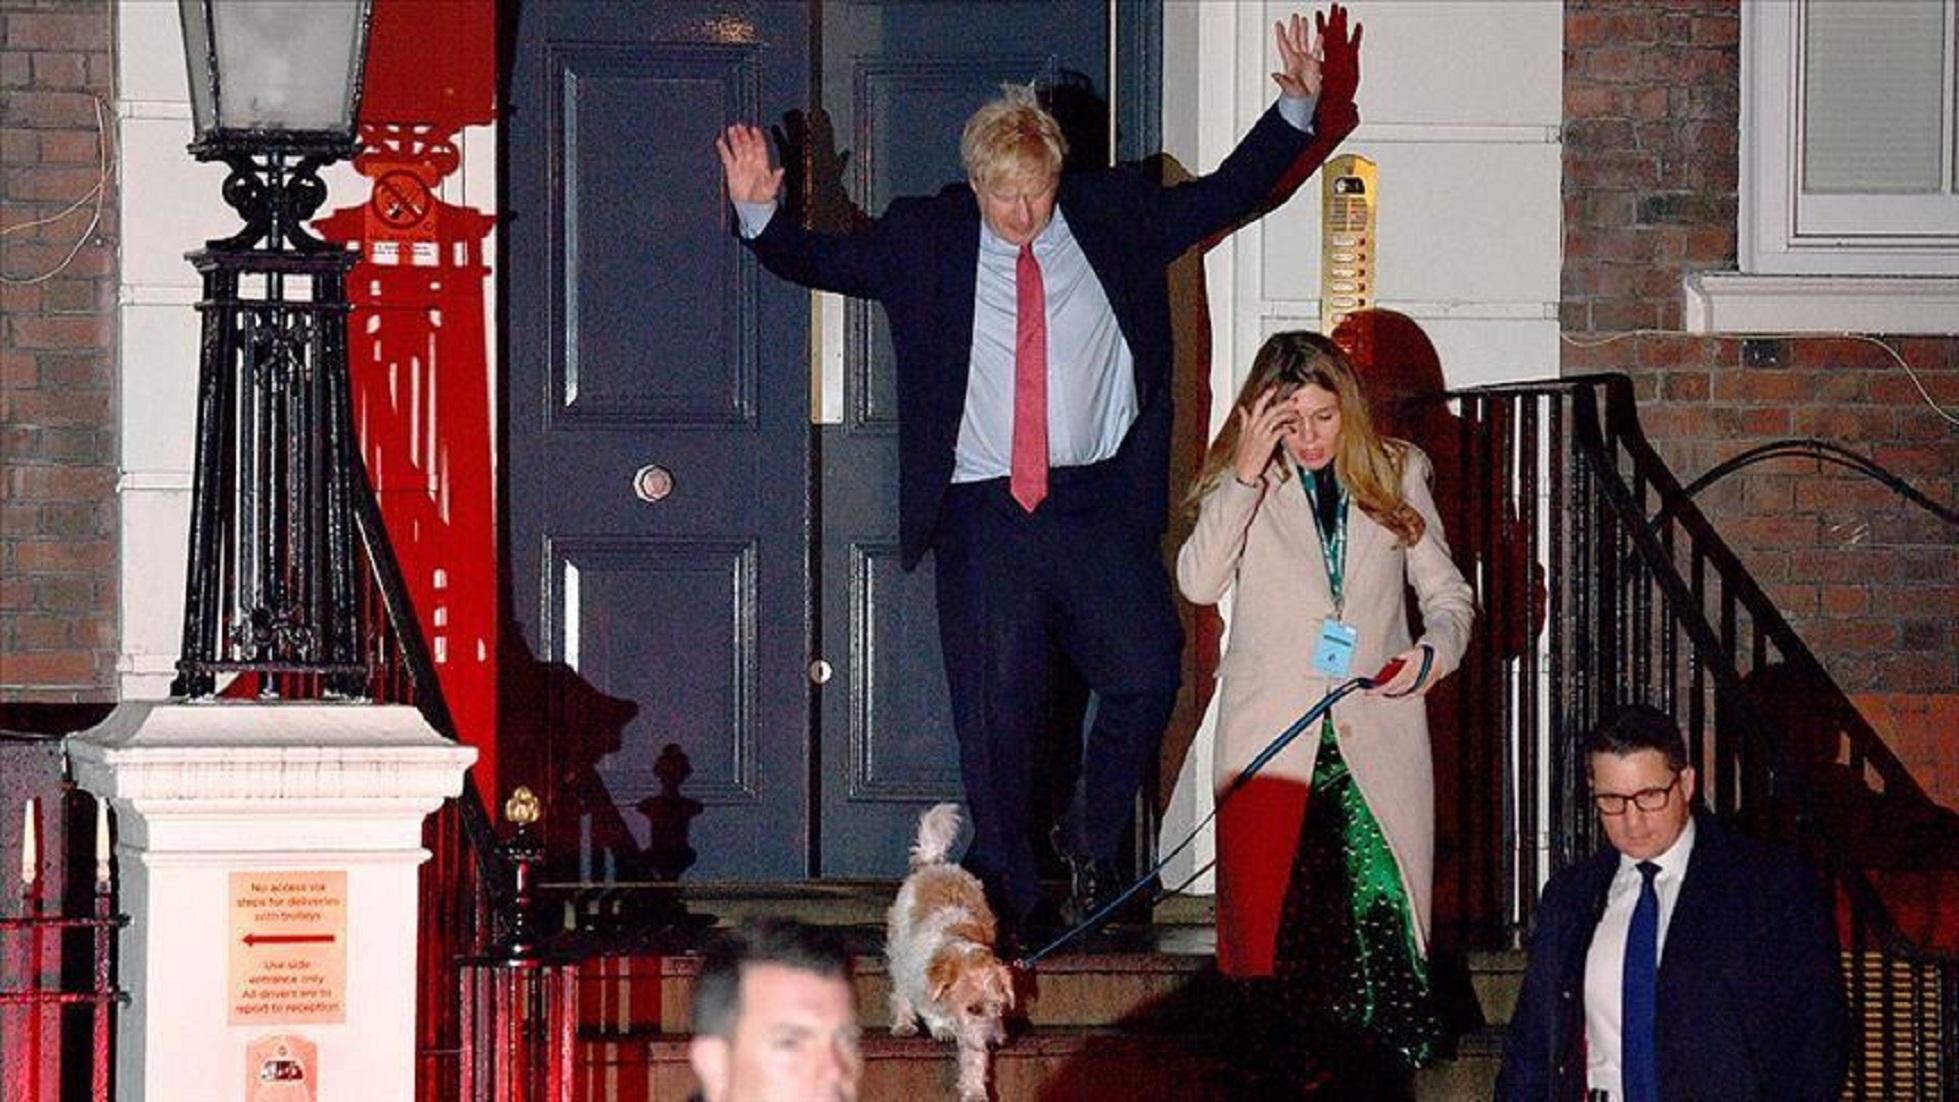 Update: Election results 2019 – Boris Johnson returns to power with big majority